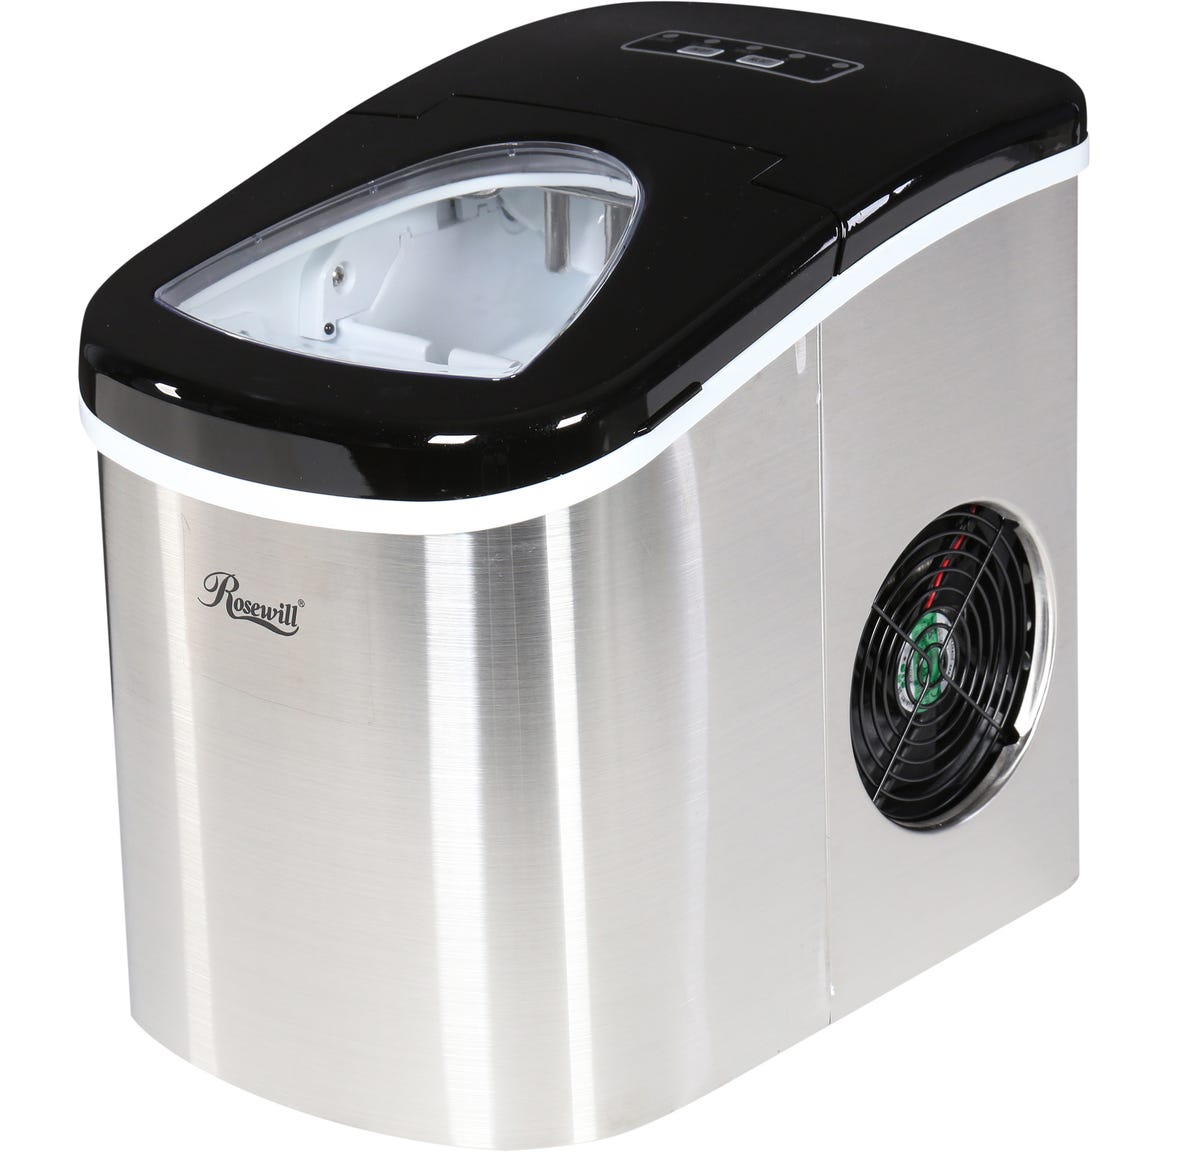 The Rosewill RHIM-15002 Portable Ice Maker picks up where the ice tray leaves off.